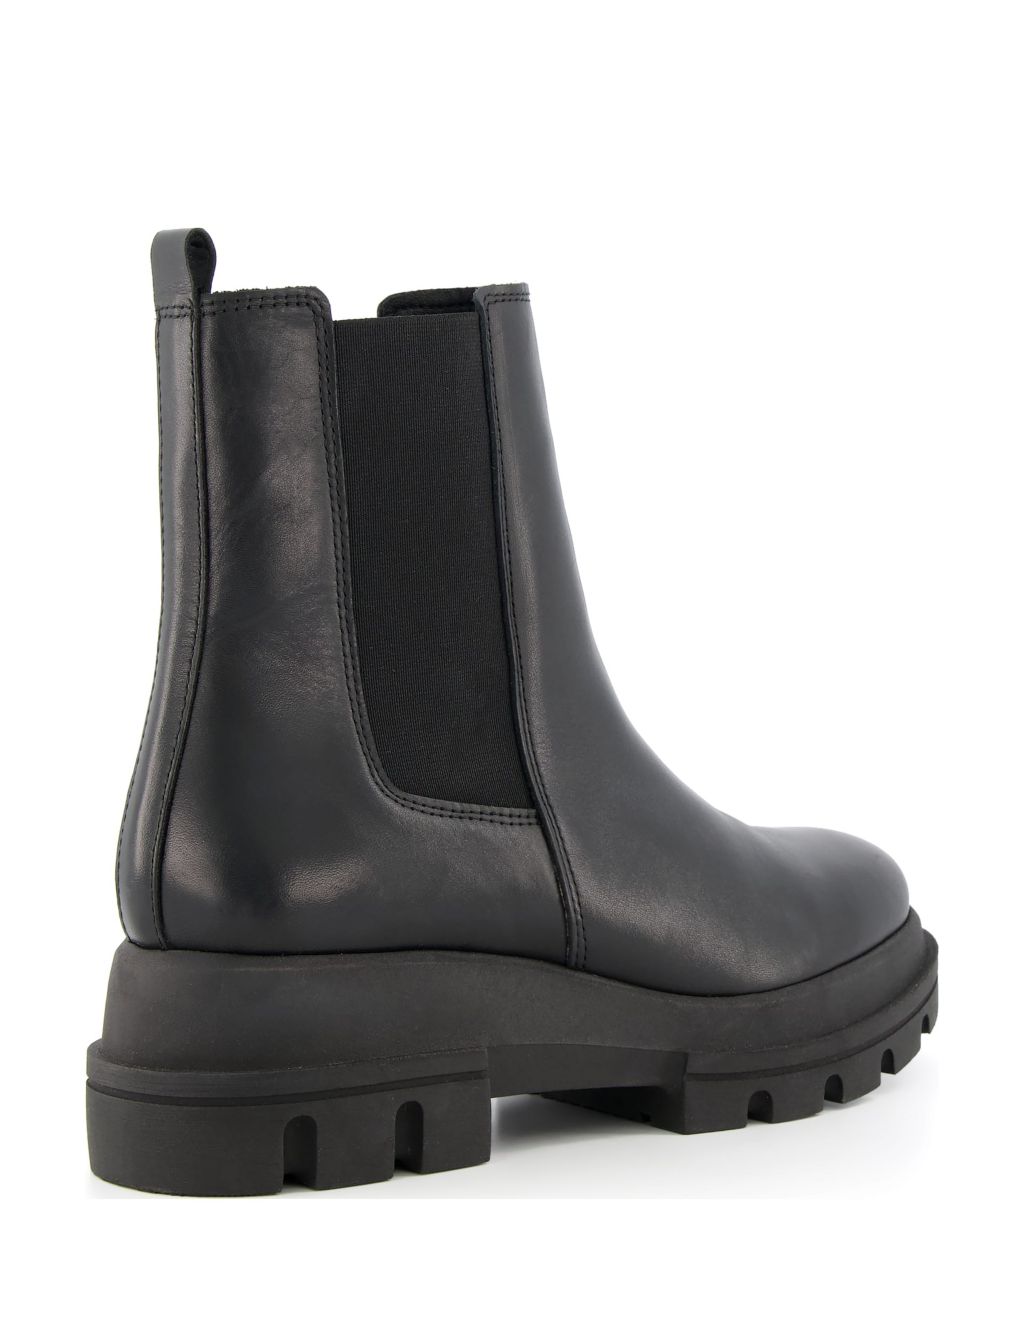 Leather Chelsea Platform Ankle Boots image 3